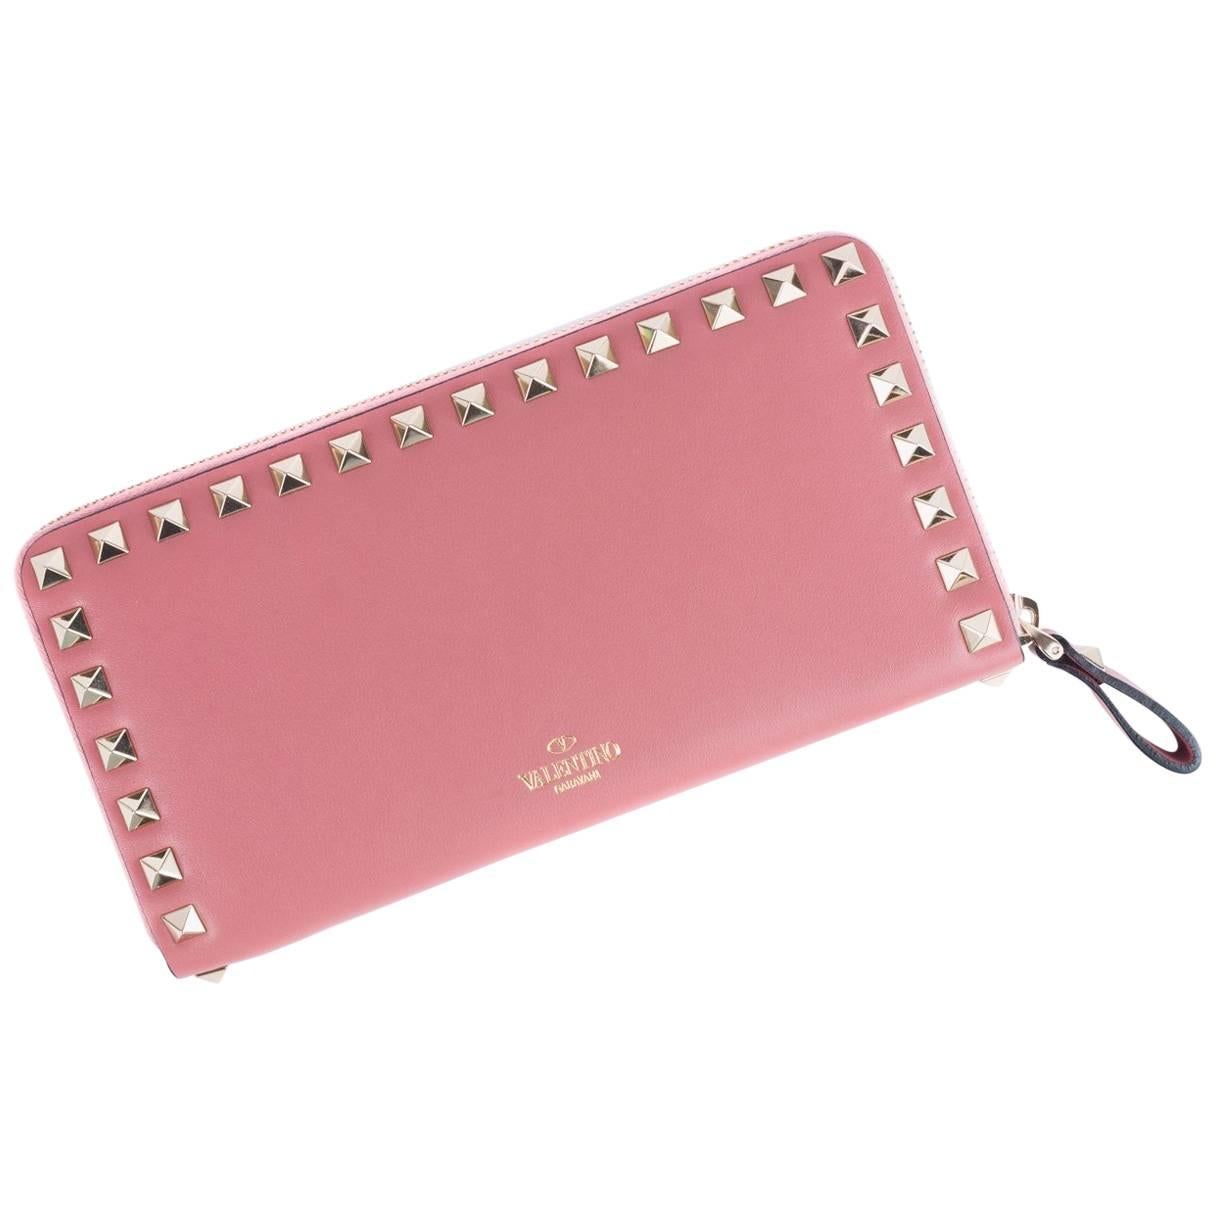 Valentino Women's Salmon Pink Leather Continental Zip Wallet